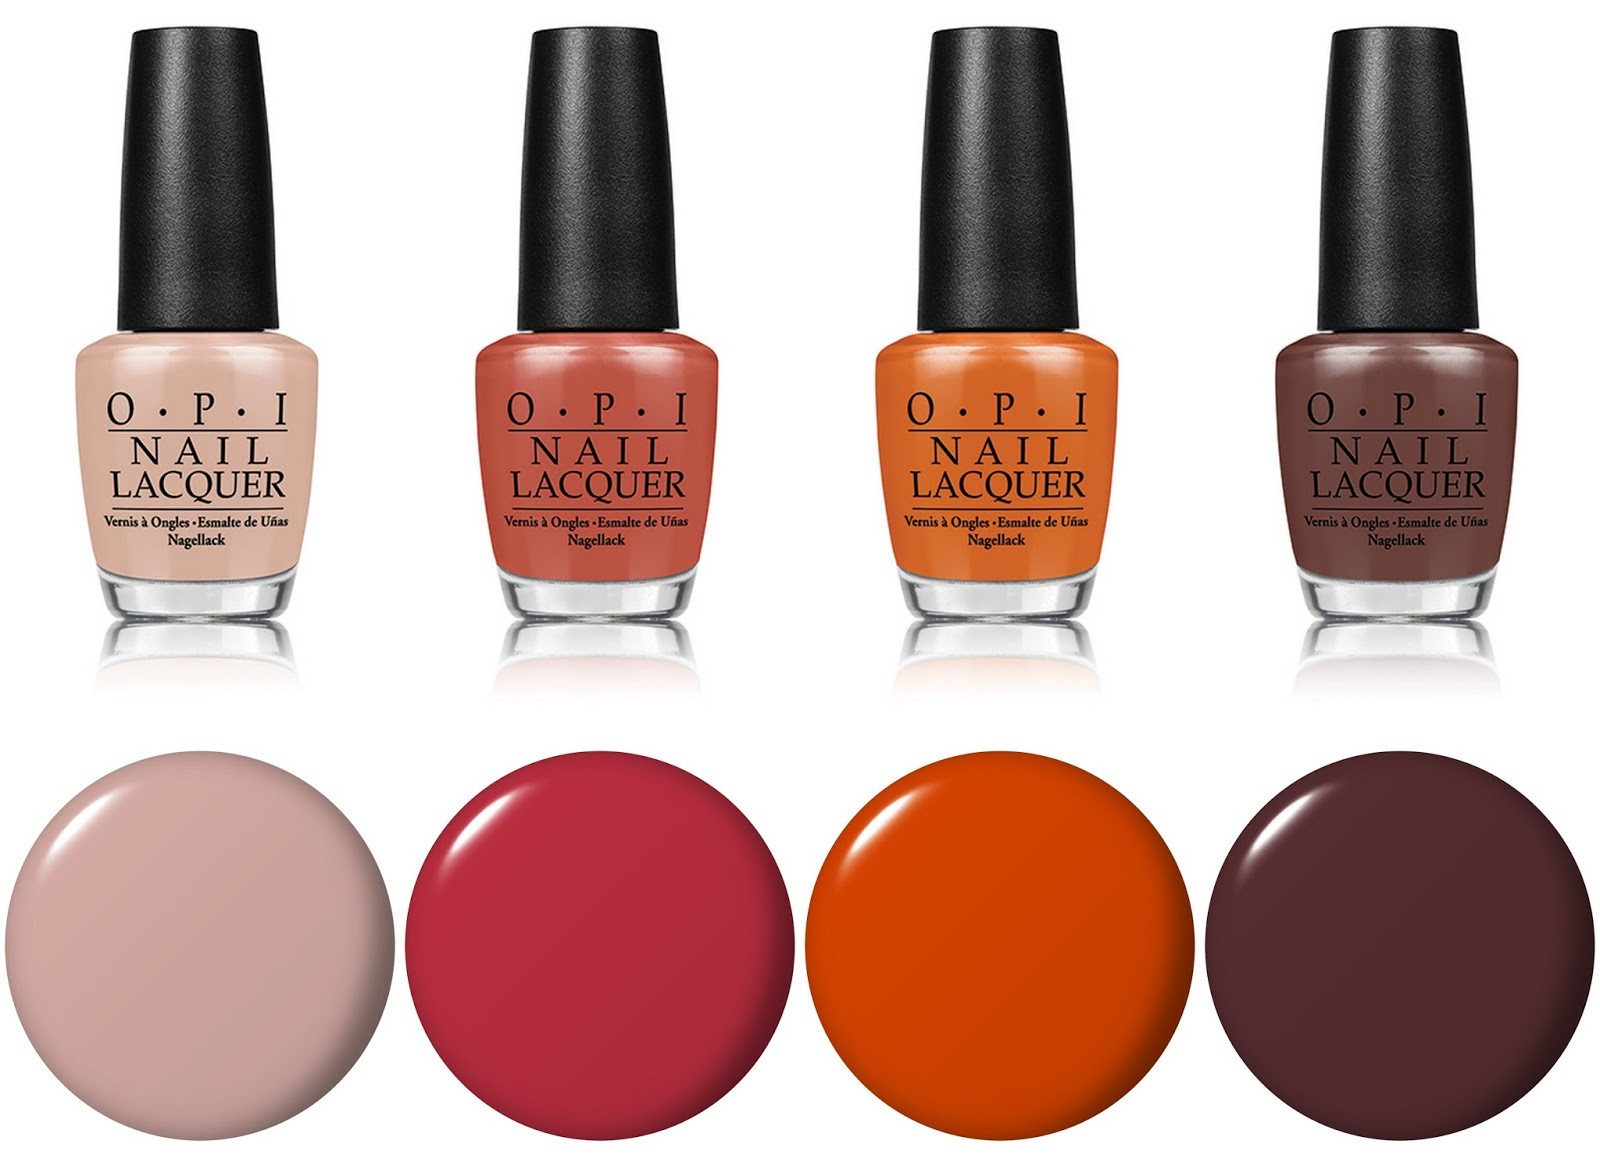 Winter Nail Colors Opi
 OPI Launches the Washington DC collection for Fall Winter